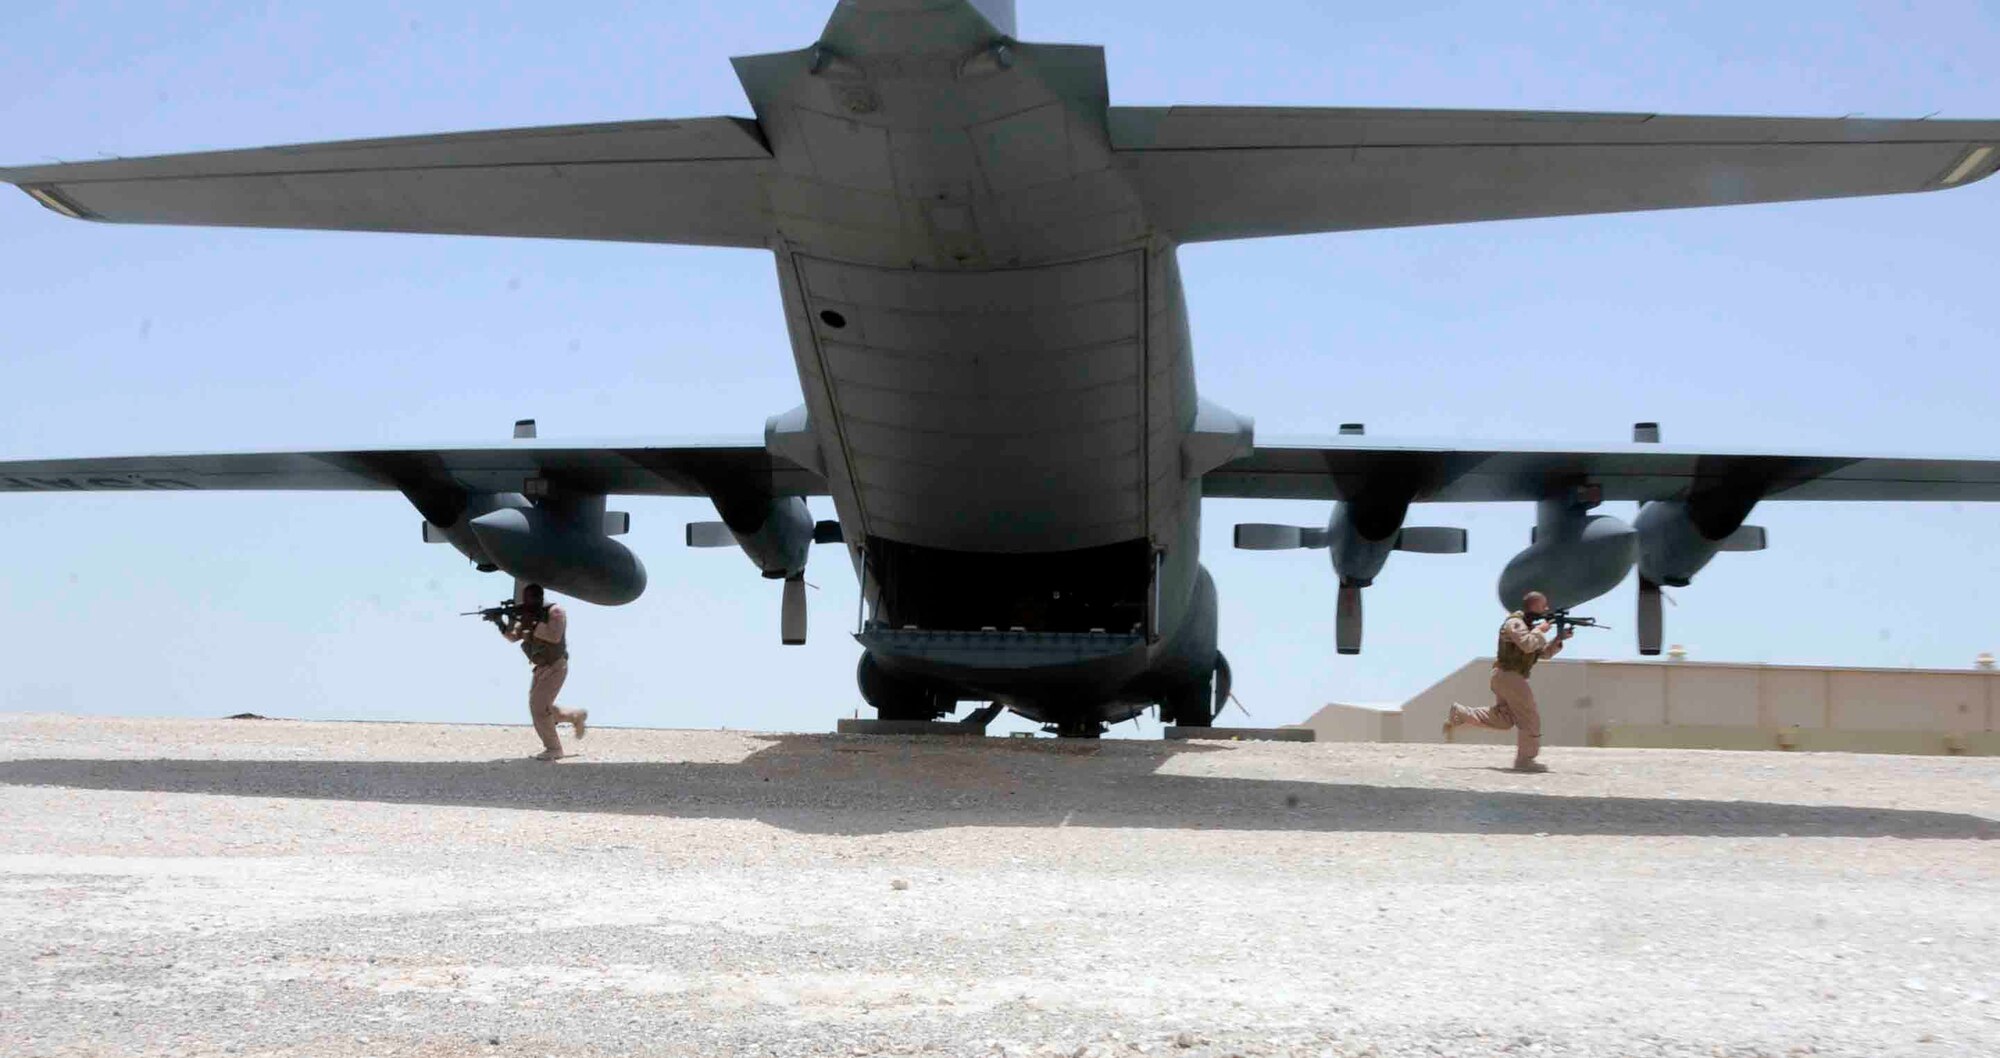 SOUTHWEST ASIA—Staff Sgt. Nahteas Murphy (left) and Senior Airman David Mattox (right) hustle out of the rear of a C-130 aircraft to post and secure a perimeter June 24. Sergeant Murphy and Airman Mattox belong to the 379th Expeditionary Security Forces Squadron's Fly Away Security Team. They fly with aircrew and land in undisclosed locations to provide security to U.S. Air Force, and U.S. military resources. (U.S. Air Force photo/ Senior Airman Domonique Simmons)